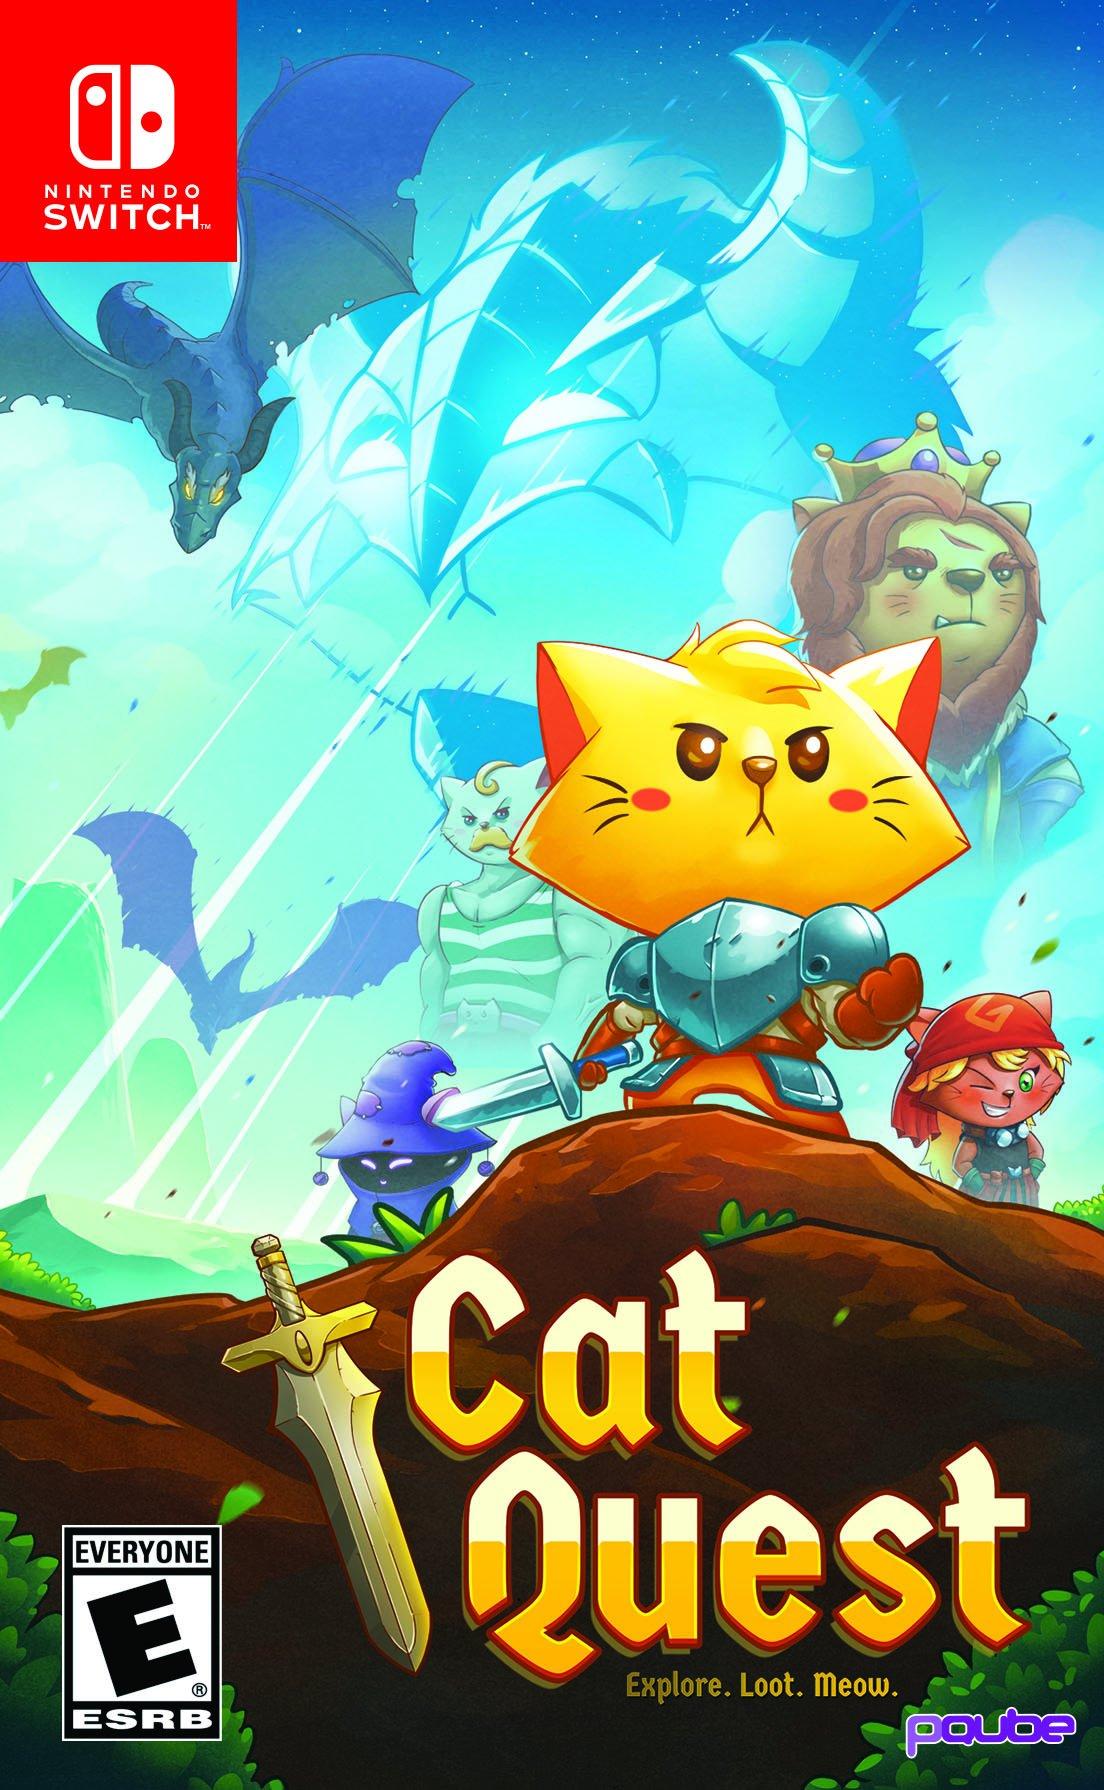 cat games on switch